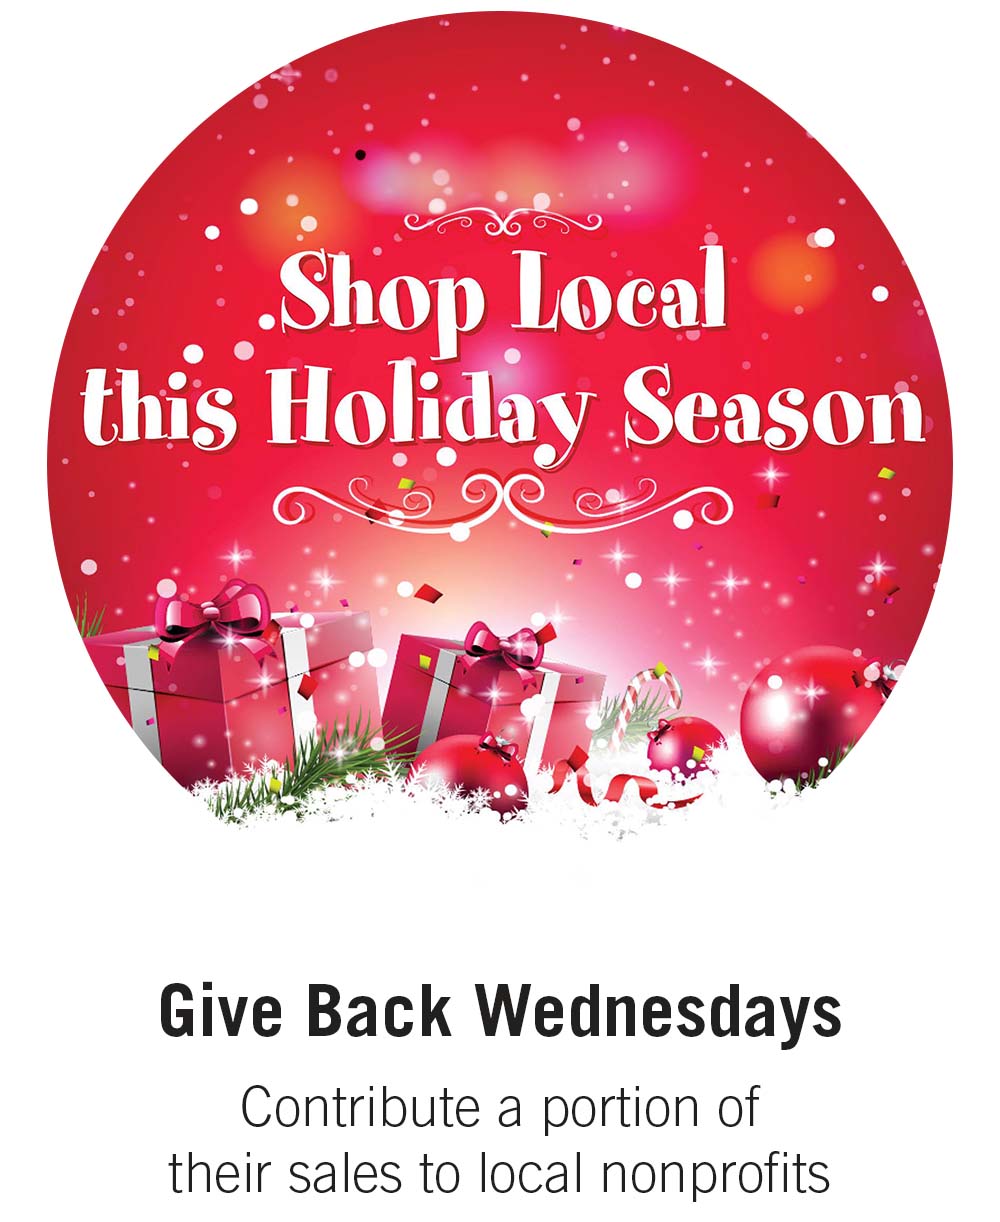 Give Back Wednesdays Contribute a portion of their sales to local nonprofits